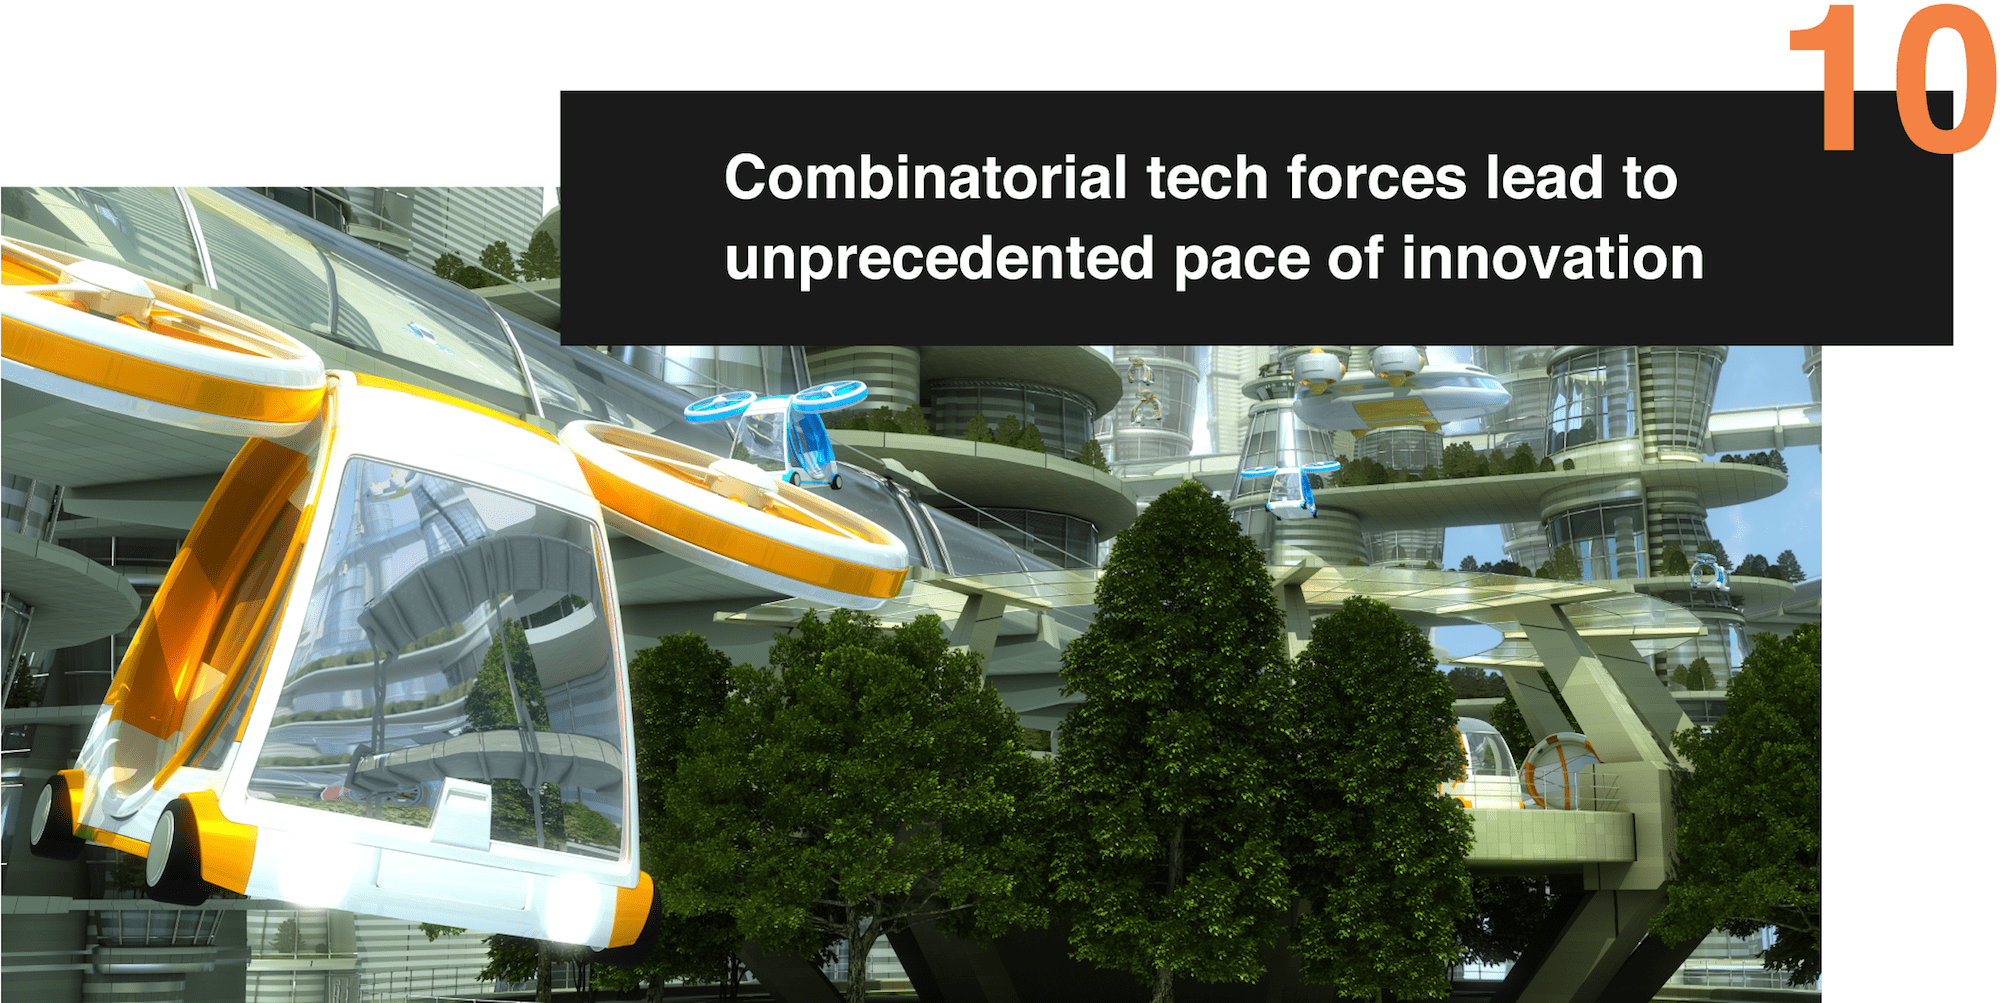 10. Combinatorial tech forces lead to an unprecedented pace of innovation